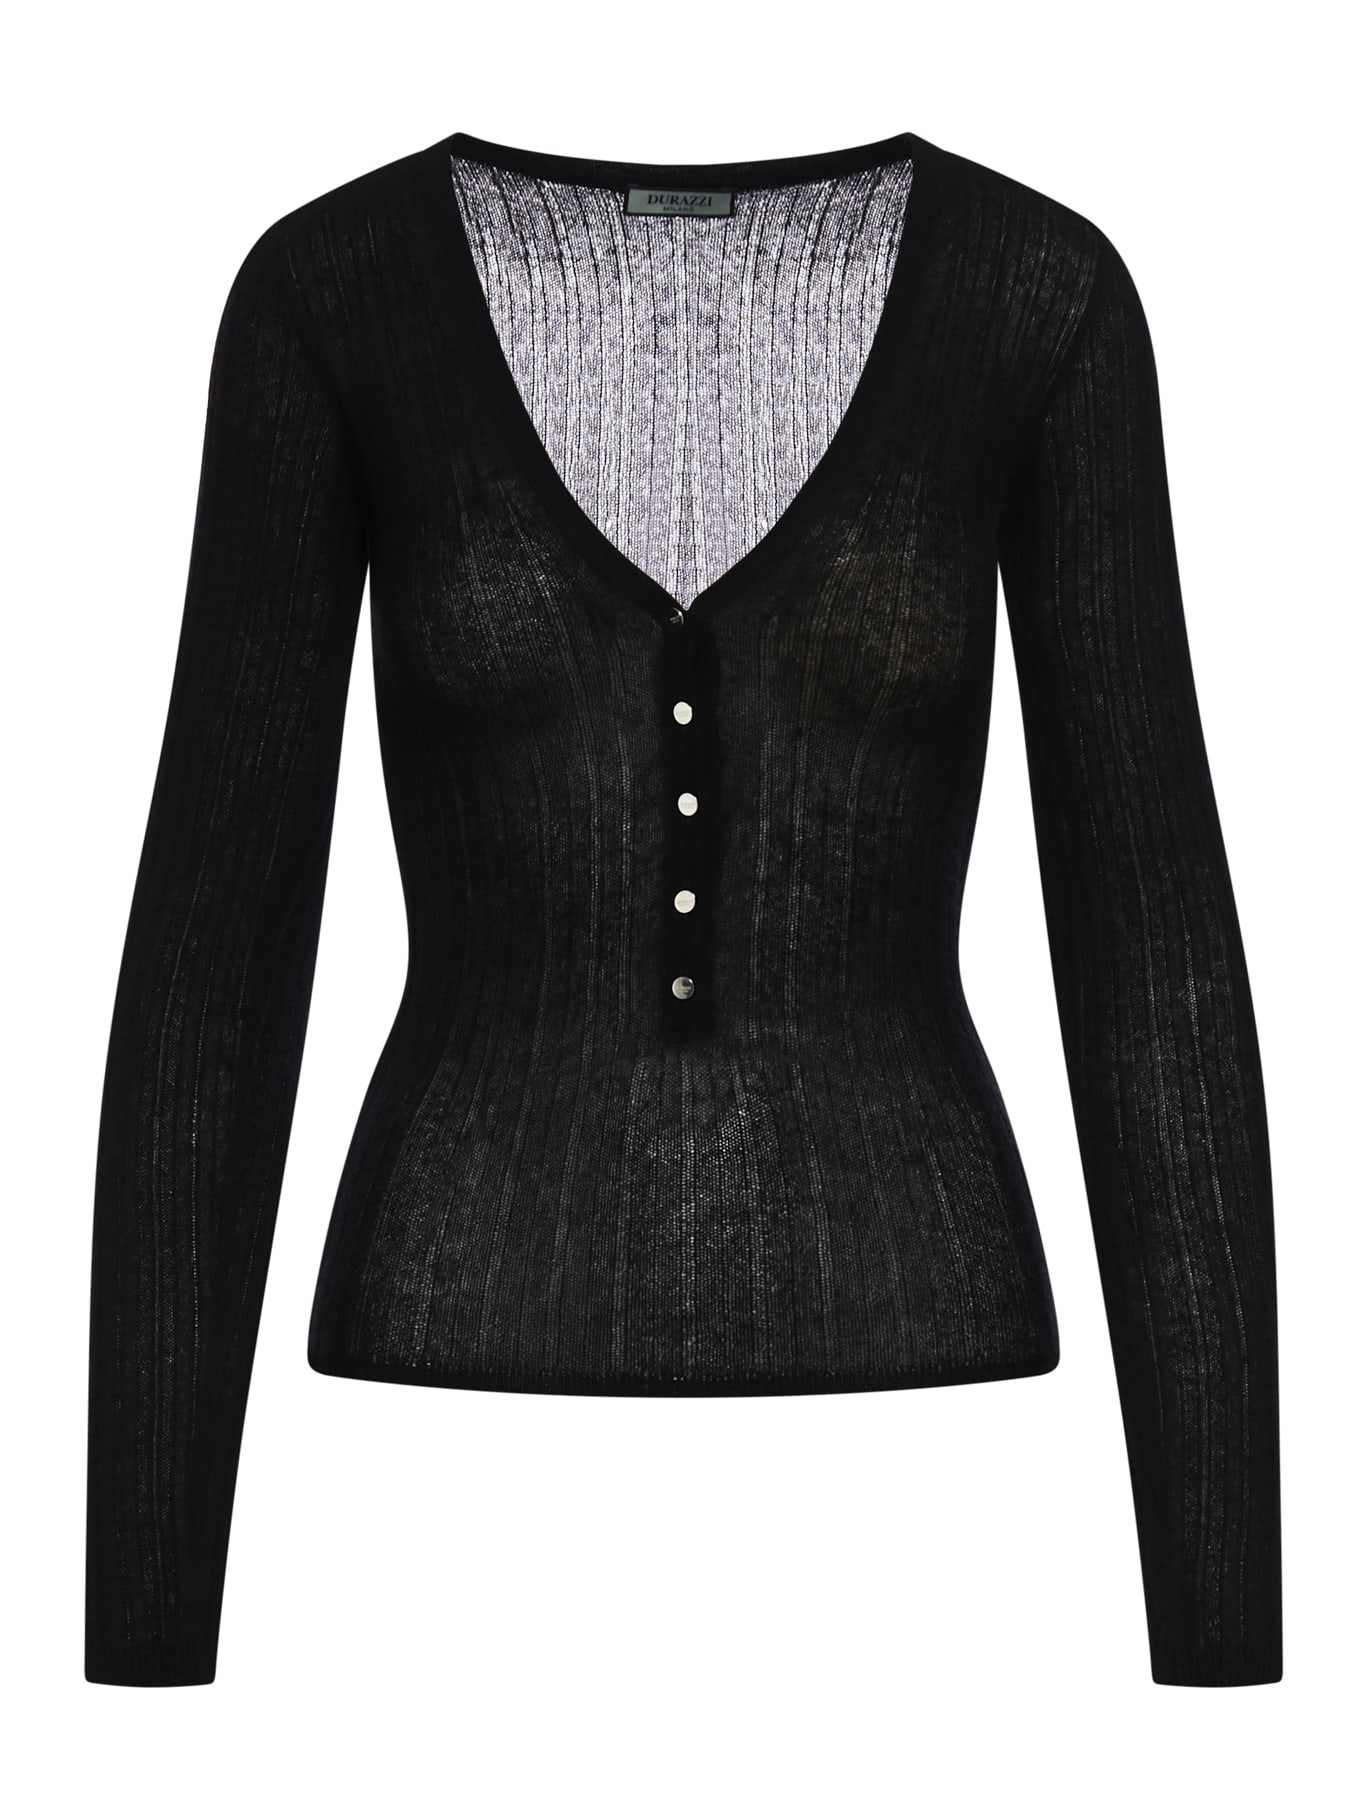 DURAZZI MILANO CASHMIRE TOPRIBBED V-NECK KNITTED TOP WITH BRANDED BOTTONS IN CASHMERE